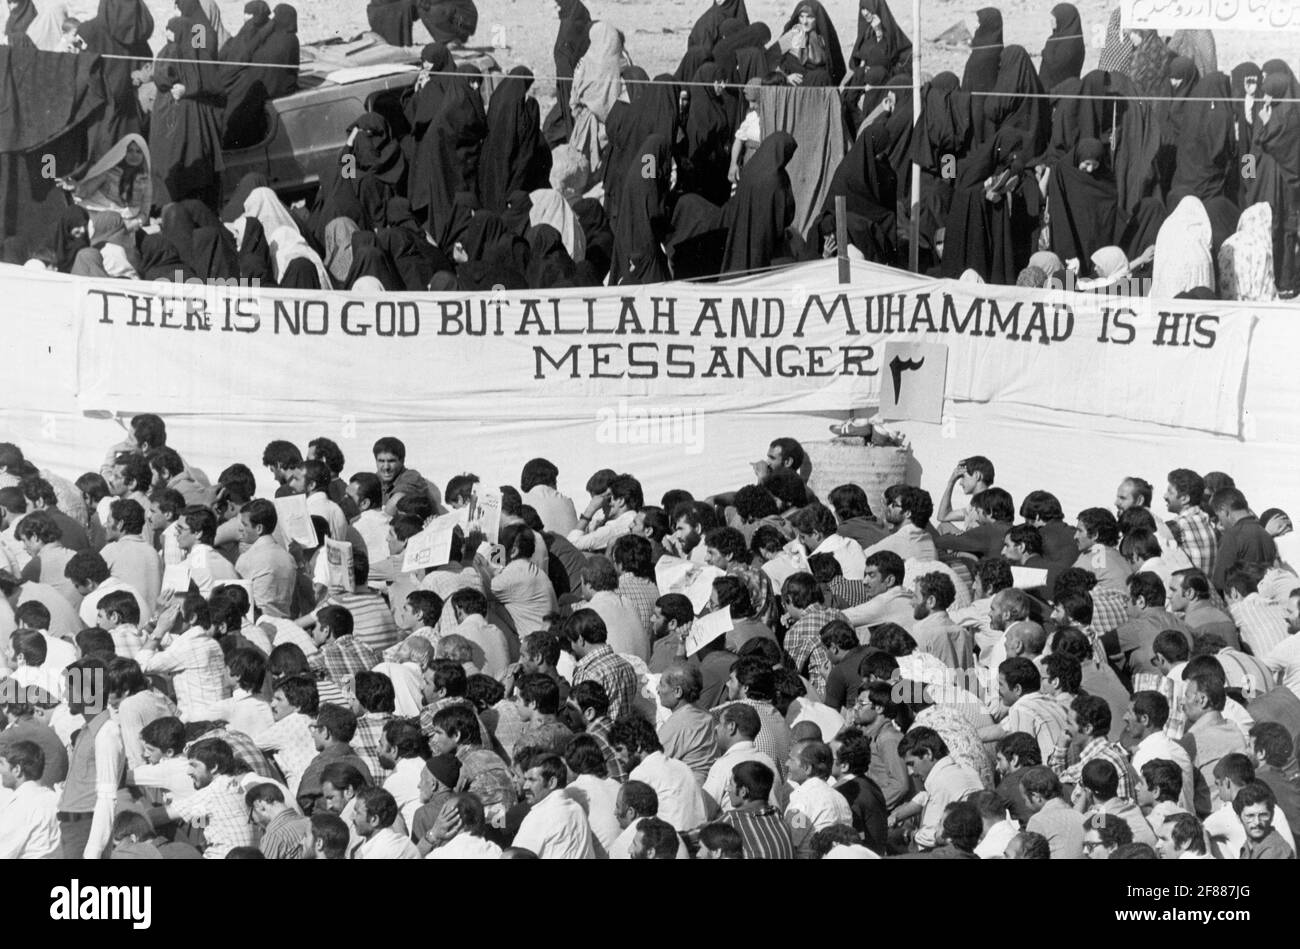 Women and children protesting against Shah Mohammad Reza Pahlavi in Teheran, Iran, September 06, 1978. The religious leaders in Iran have a strong grip on the masses. In the picture protesters in prayer under a banner with the Islamic creed in English, there is no god but Allah and Muhammad is his prophet.  Photo: Stig A Nilsson / DN / TT / code 43 Stock Photo